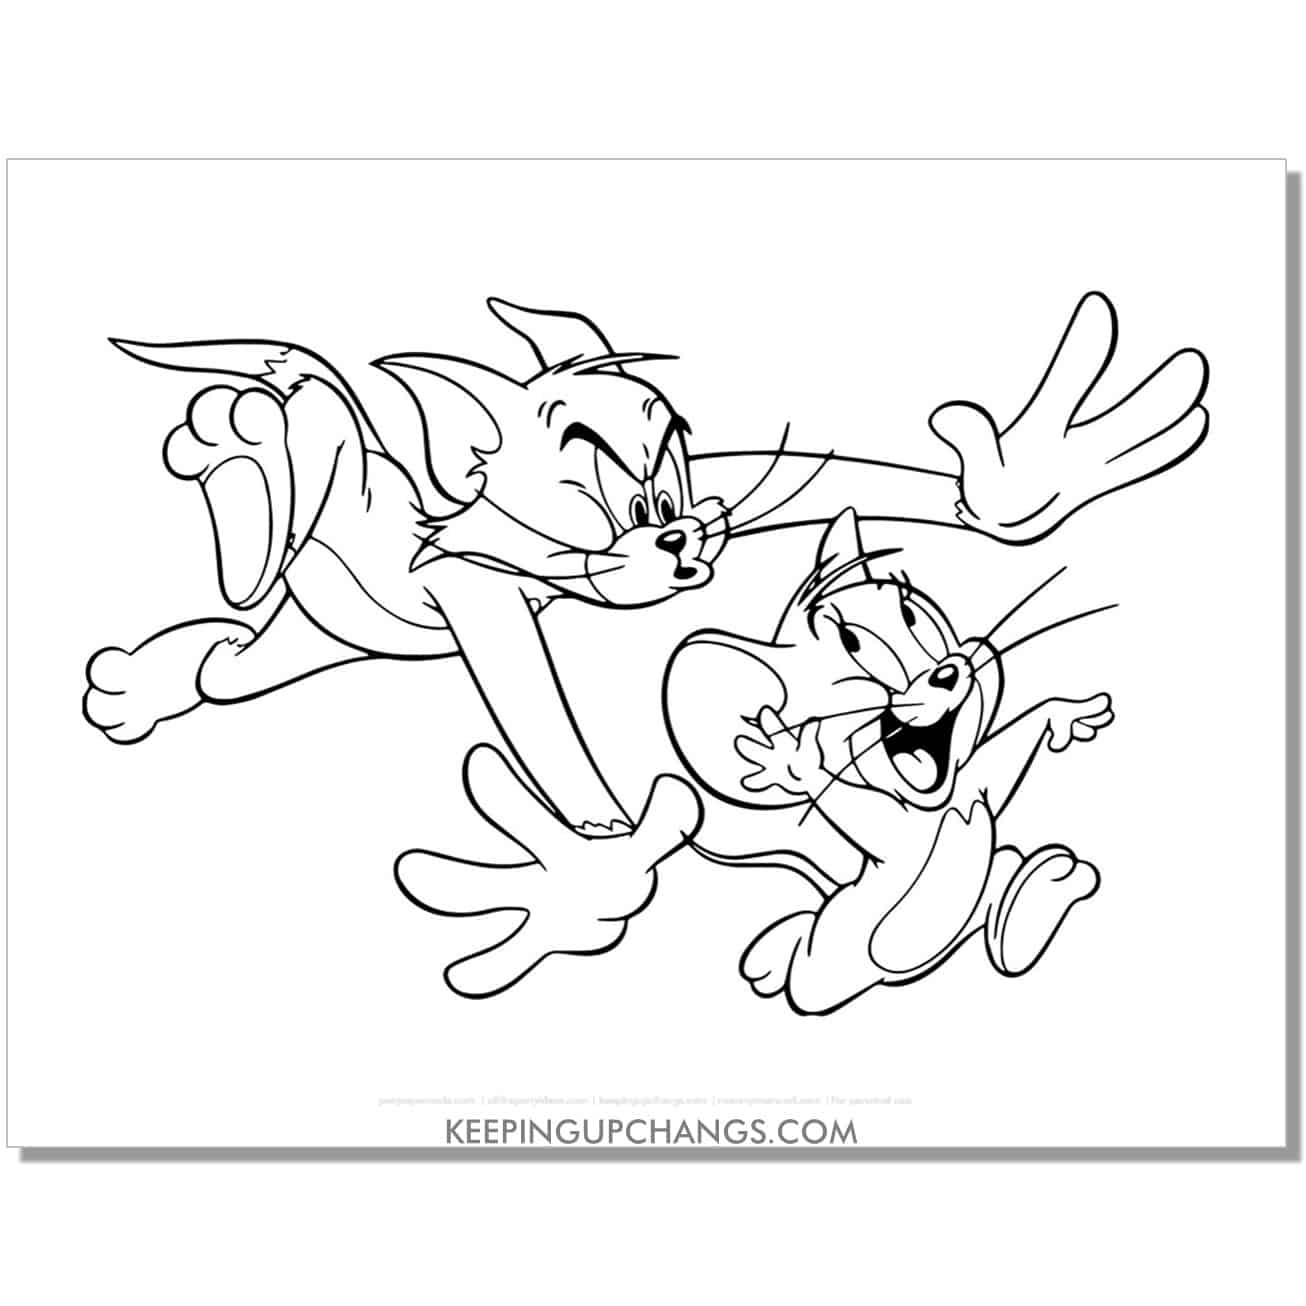 free tom and jerry chasing coloring page.